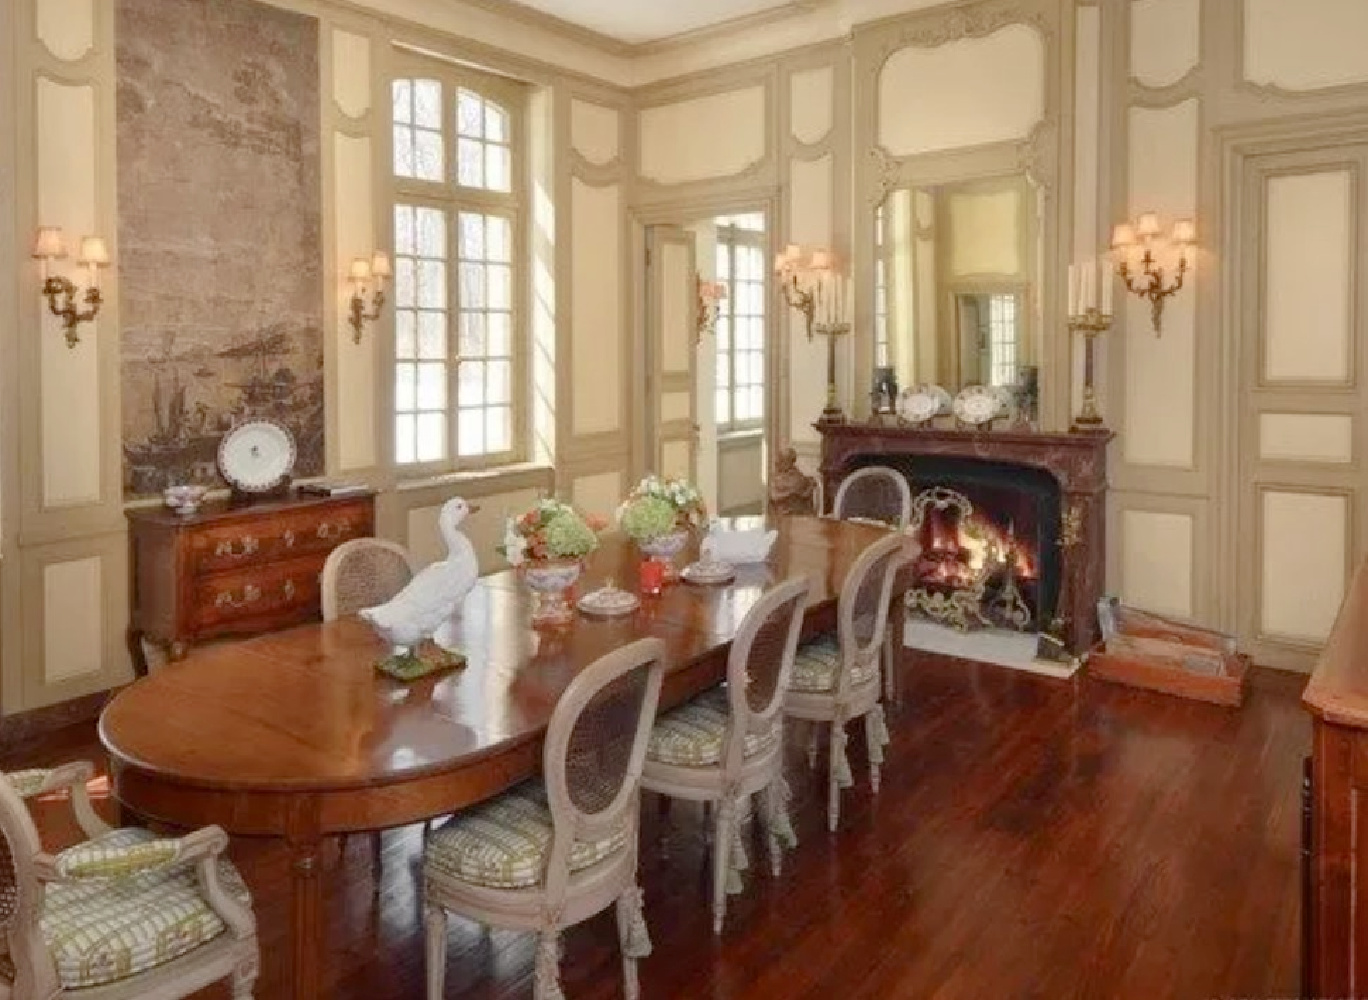 Dining room with paneling in a French country interior with fireplace. David Adler La Lanterne Mansion is a 1922 historic home in Lake Bluff with French inspired architecture and interiors.